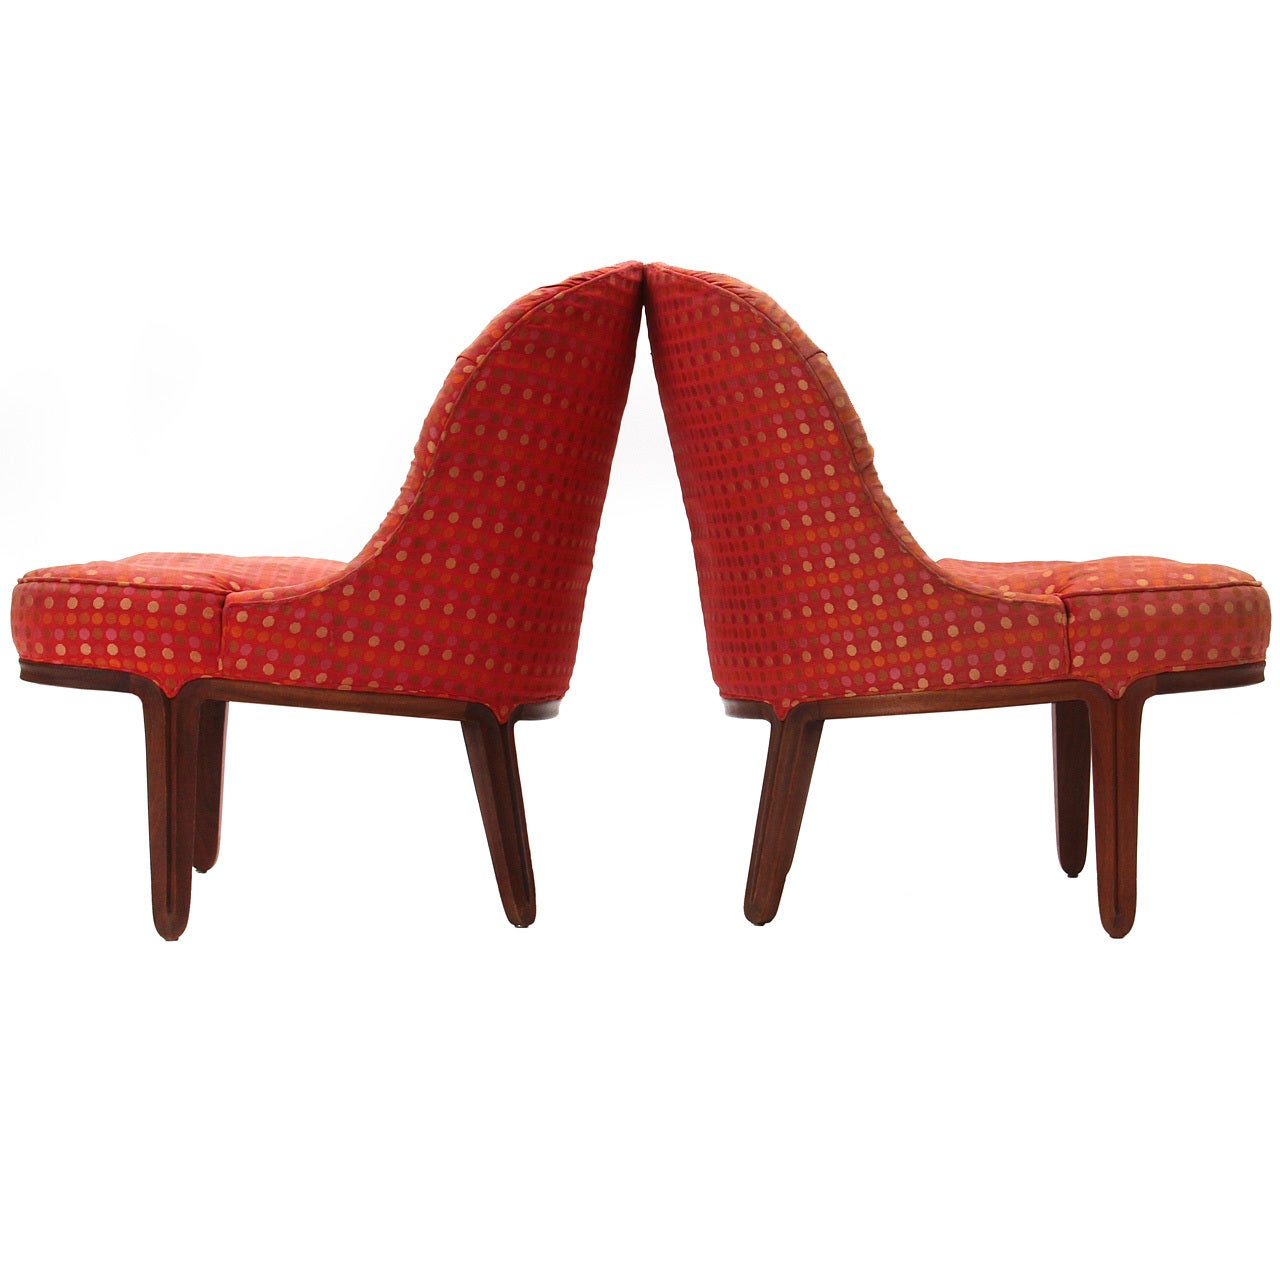 Pair of Slipper Chairs by Edward Wormley